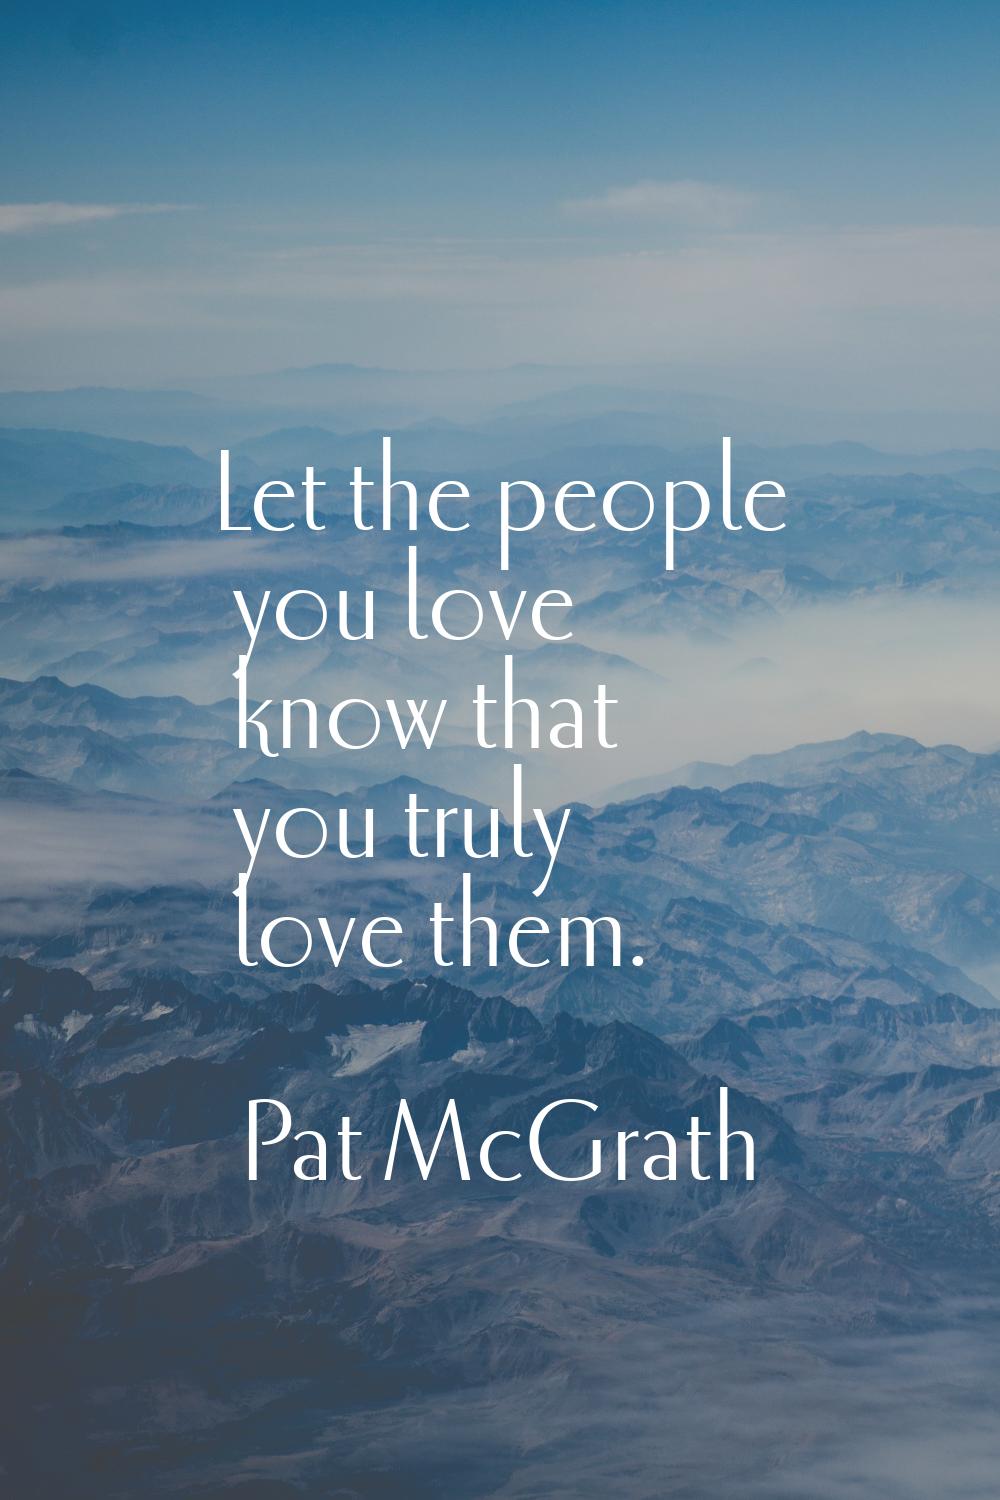 Let the people you love know that you truly love them.